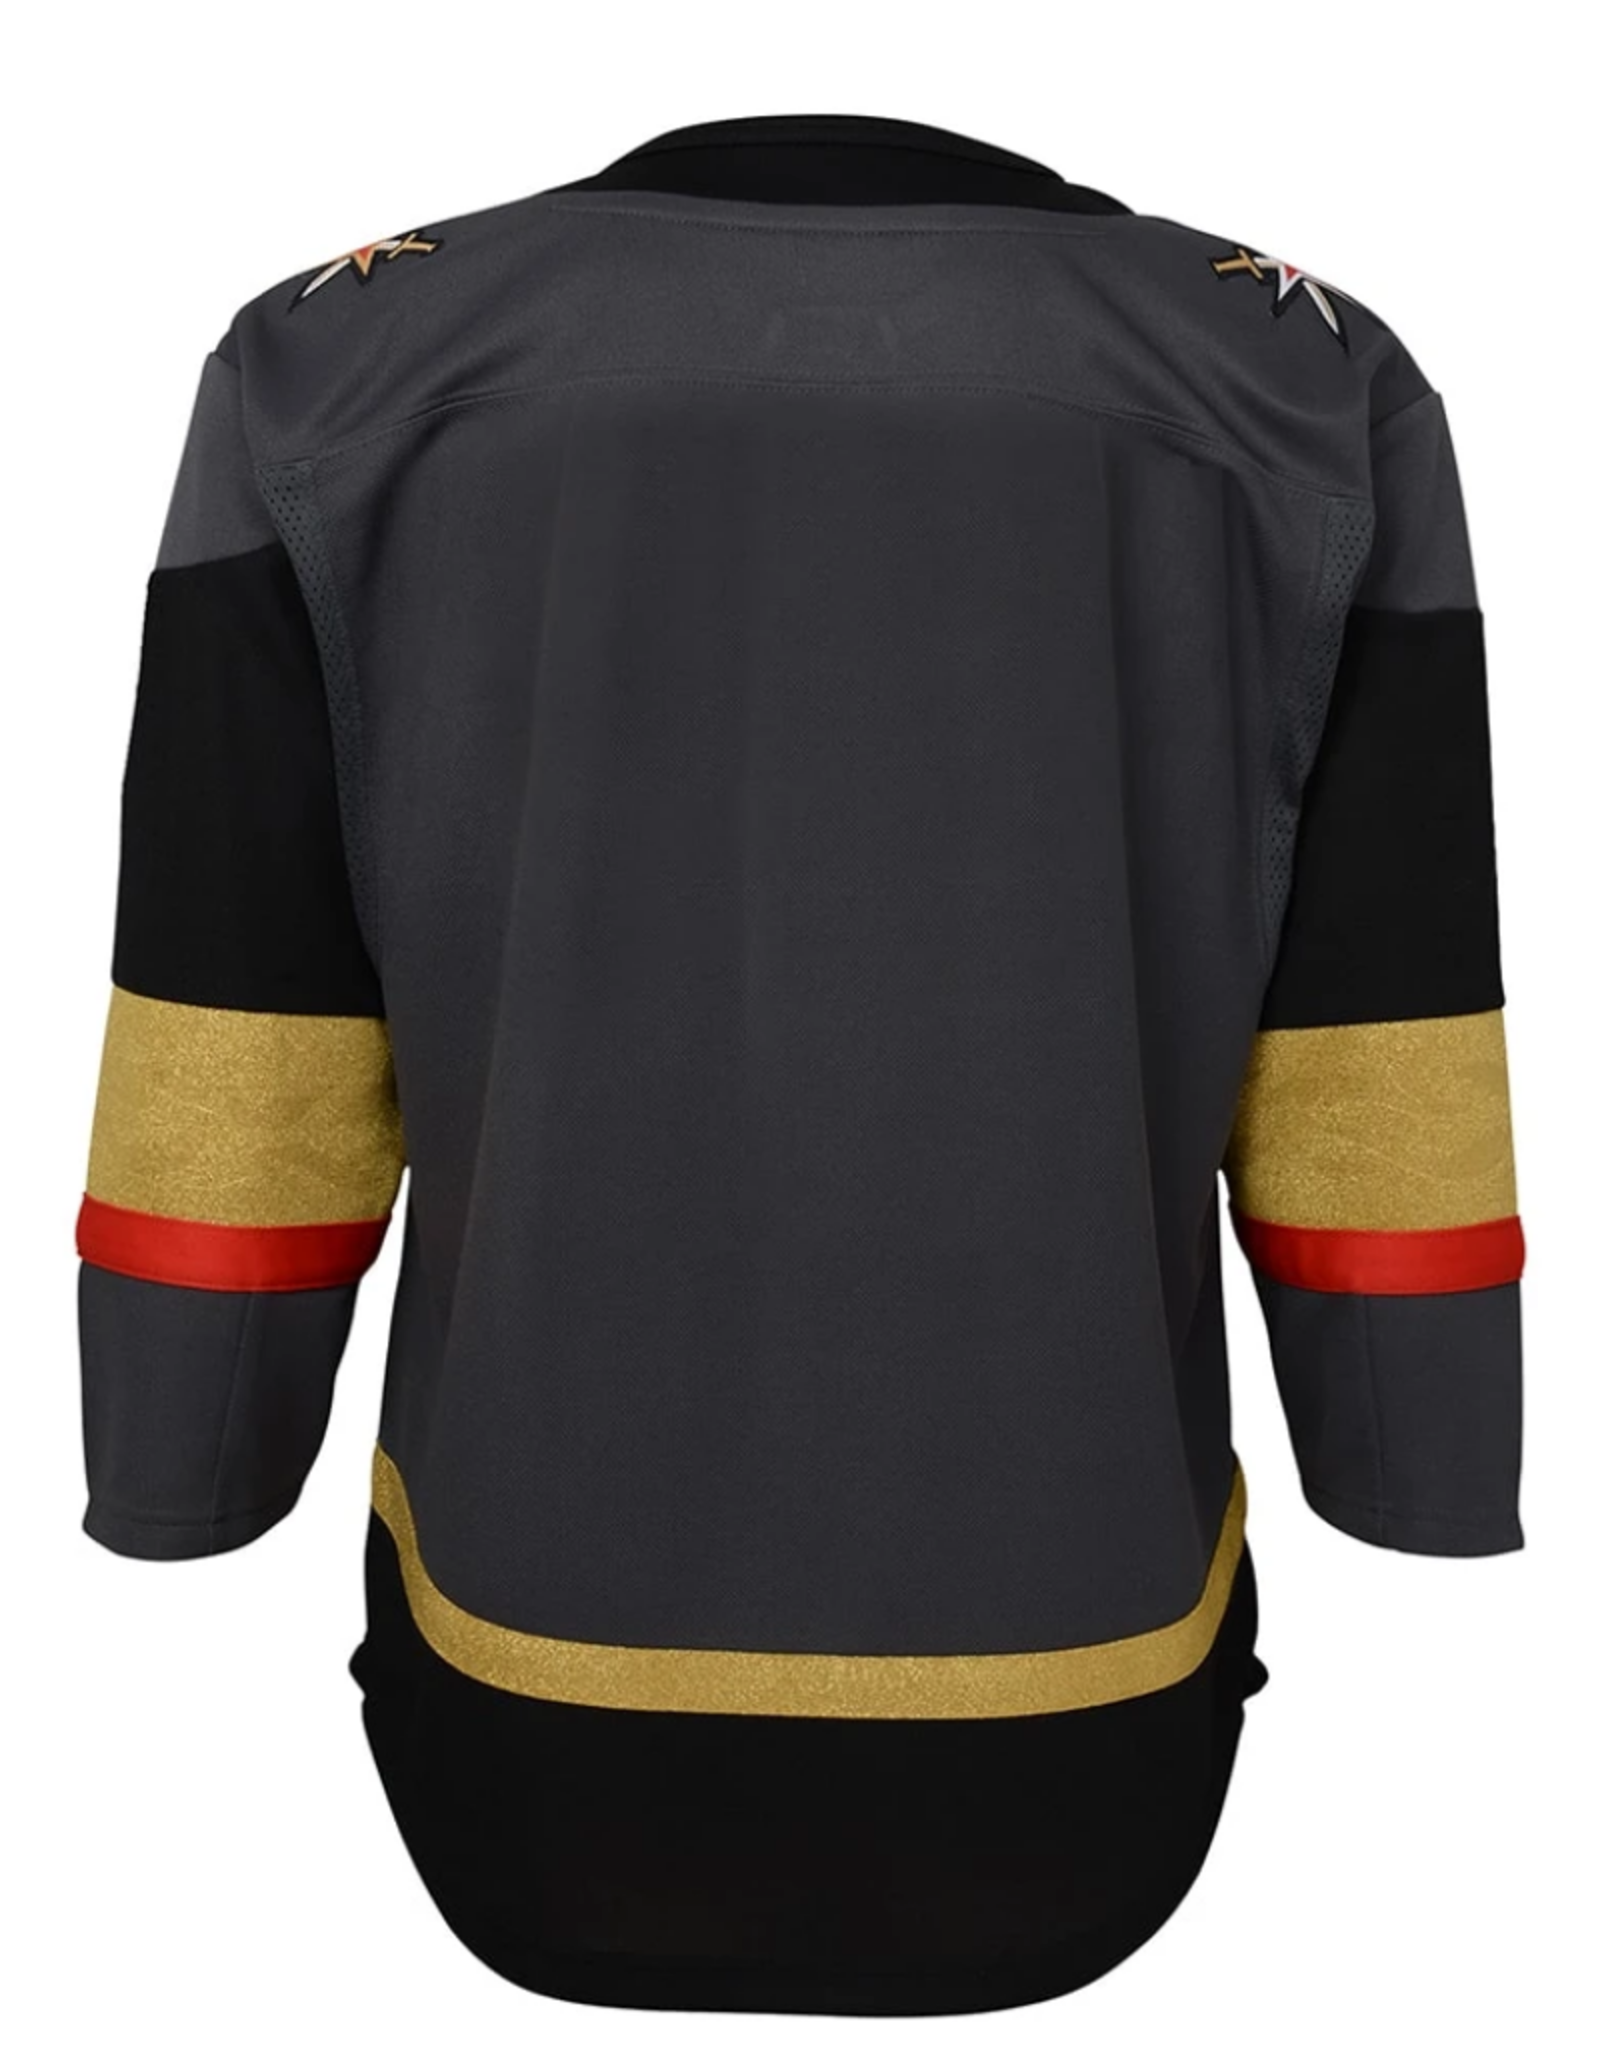 NHL Youth Premier Home Jersey Vegas Golden Knights Grey